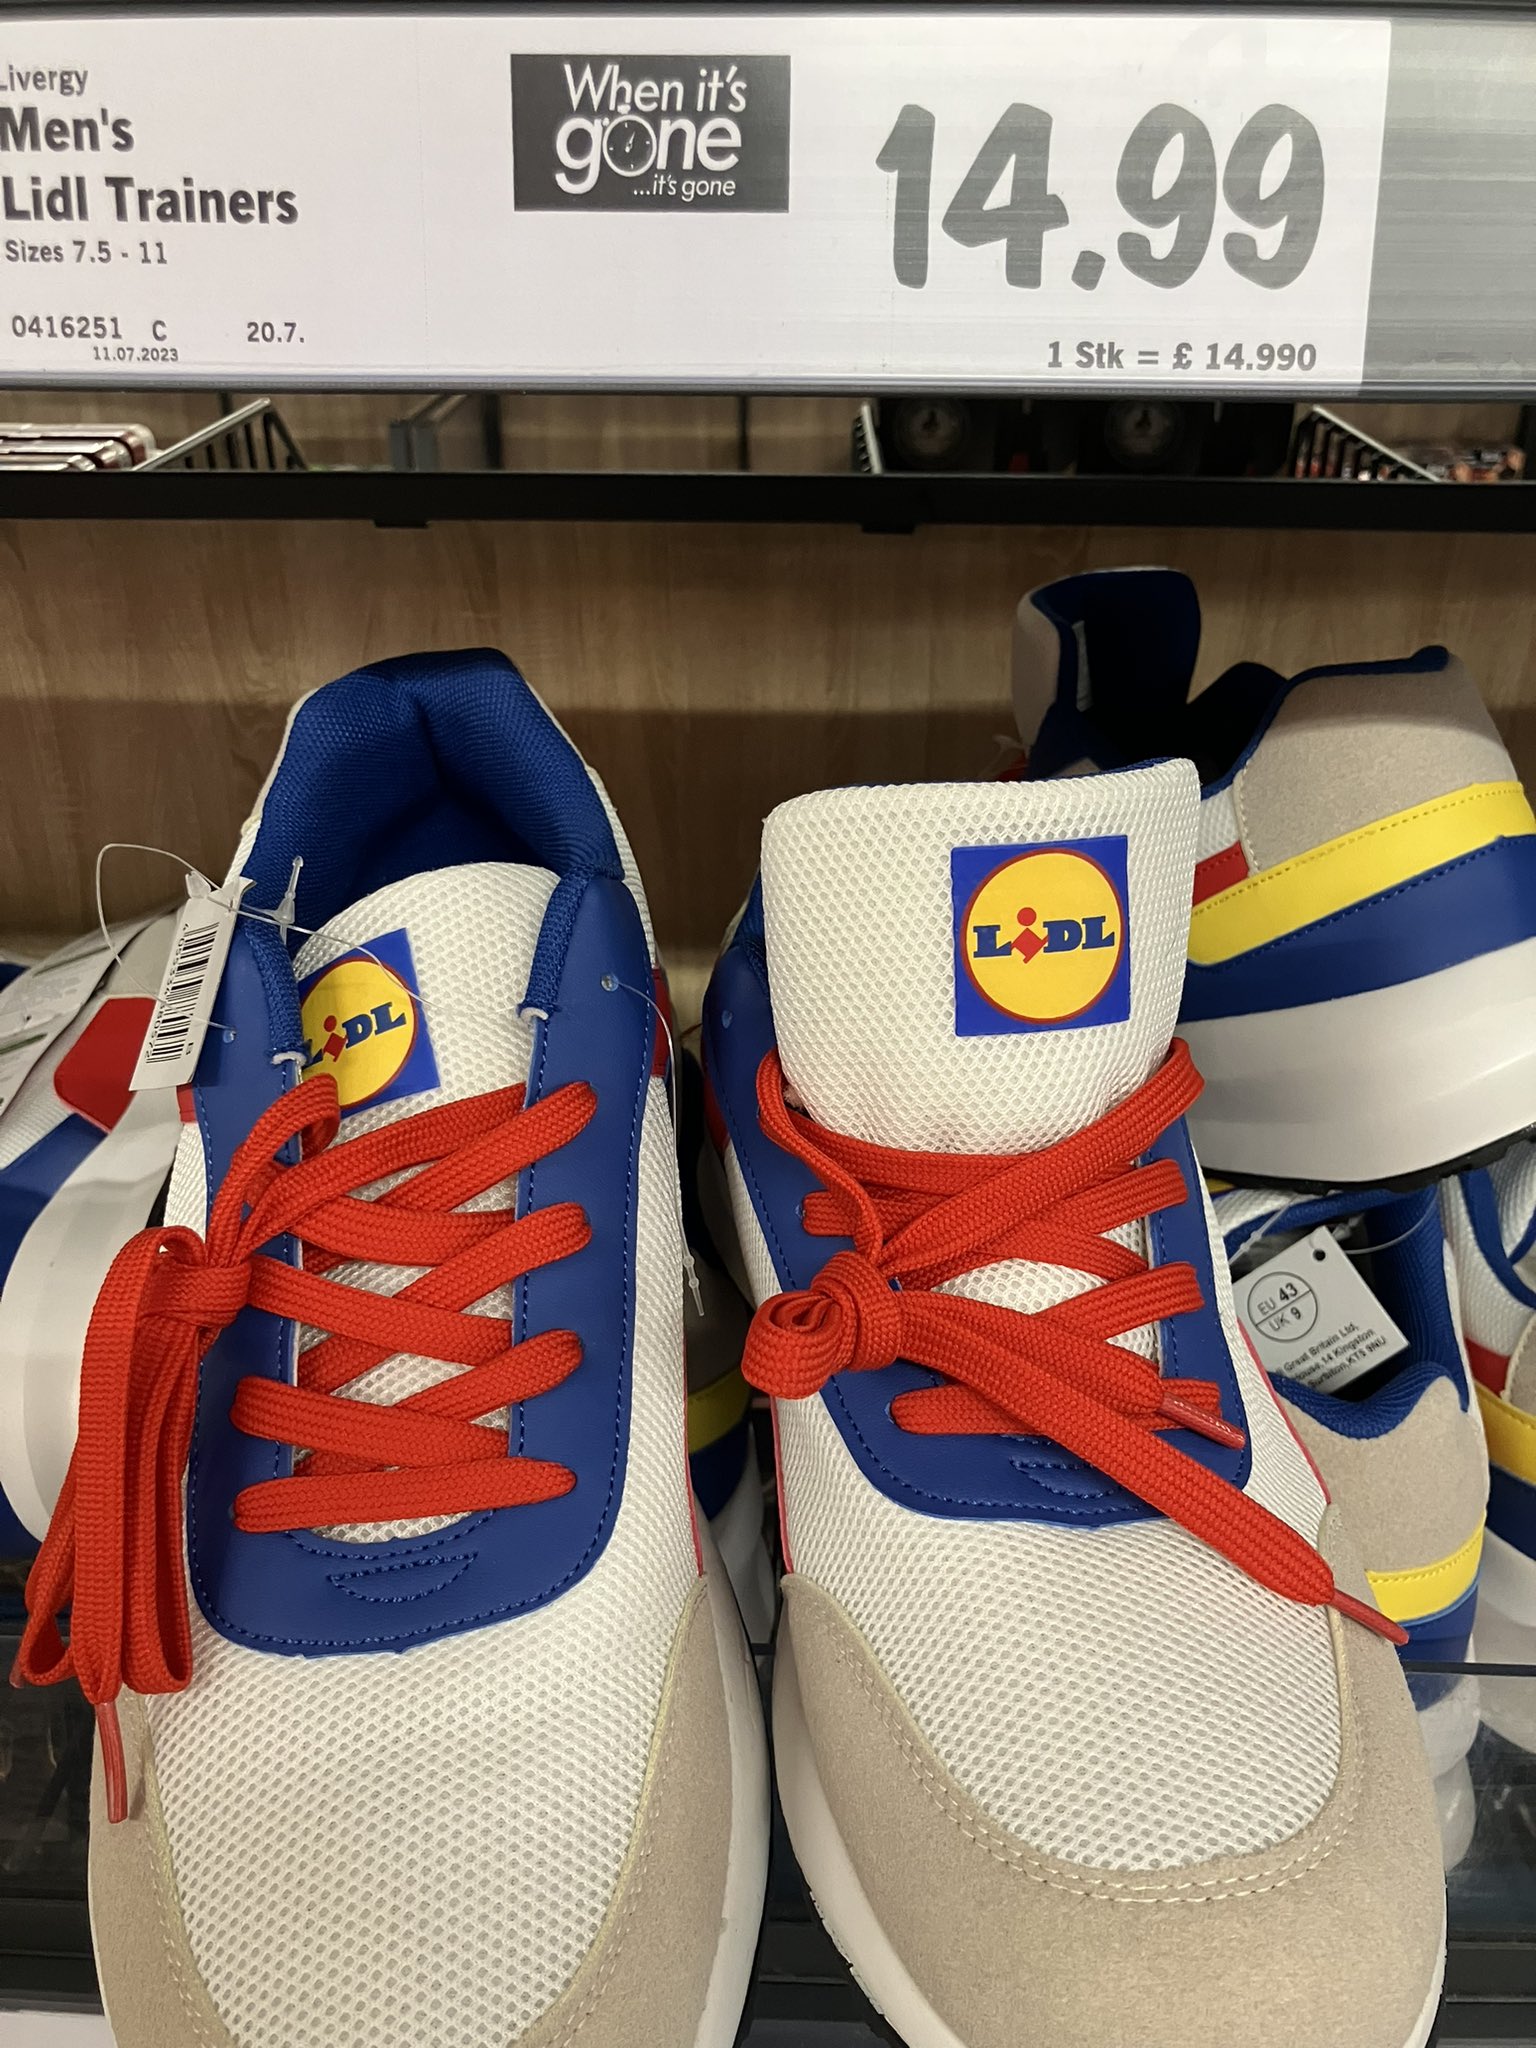 Steven Sheil on X: There are Lidl trainers now